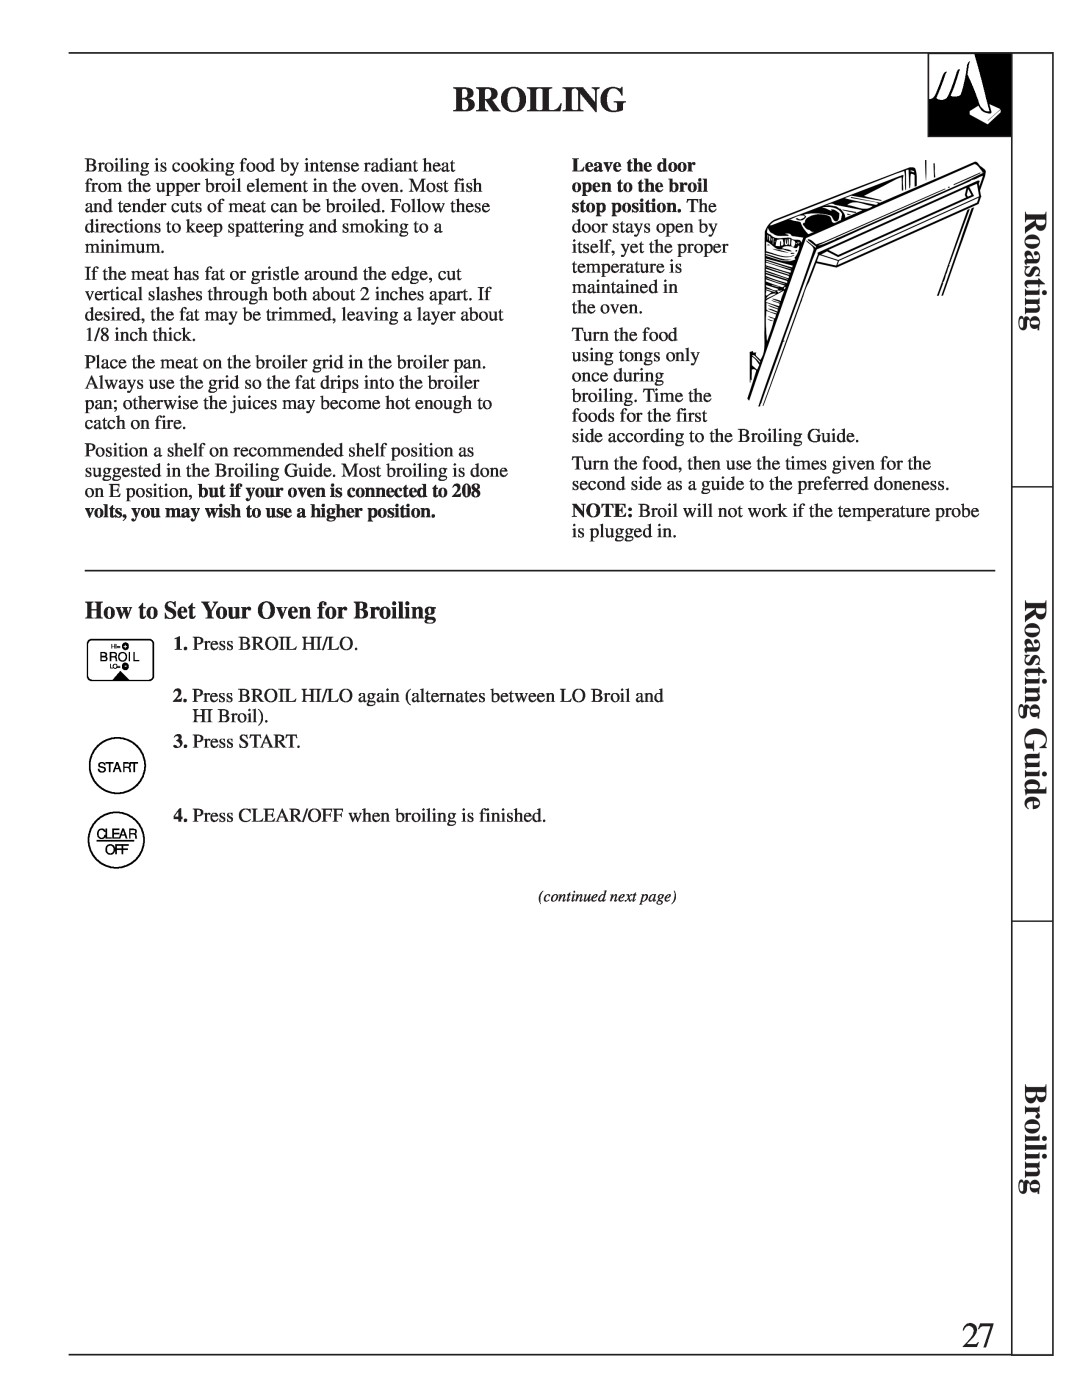 GE 164D2966P205-1 manual Roasting Guide Broiling, How to Set Your Oven for Broiling 